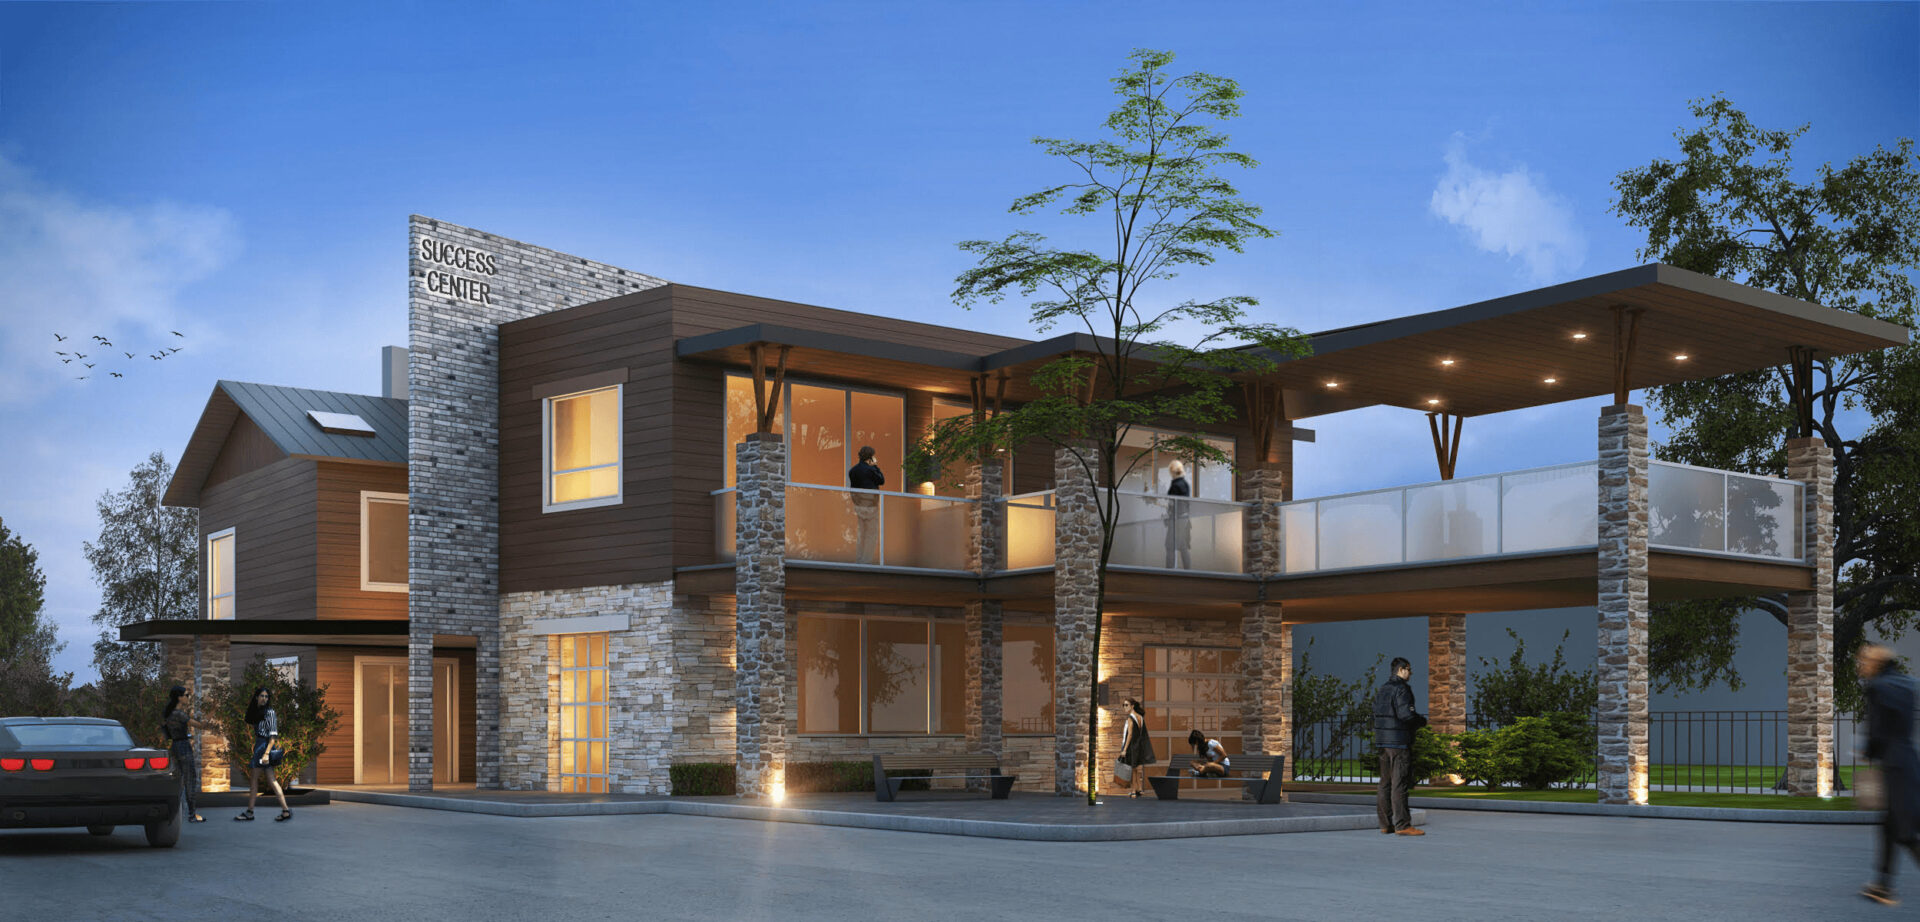 Dallas best Waal Architecture designing with nature